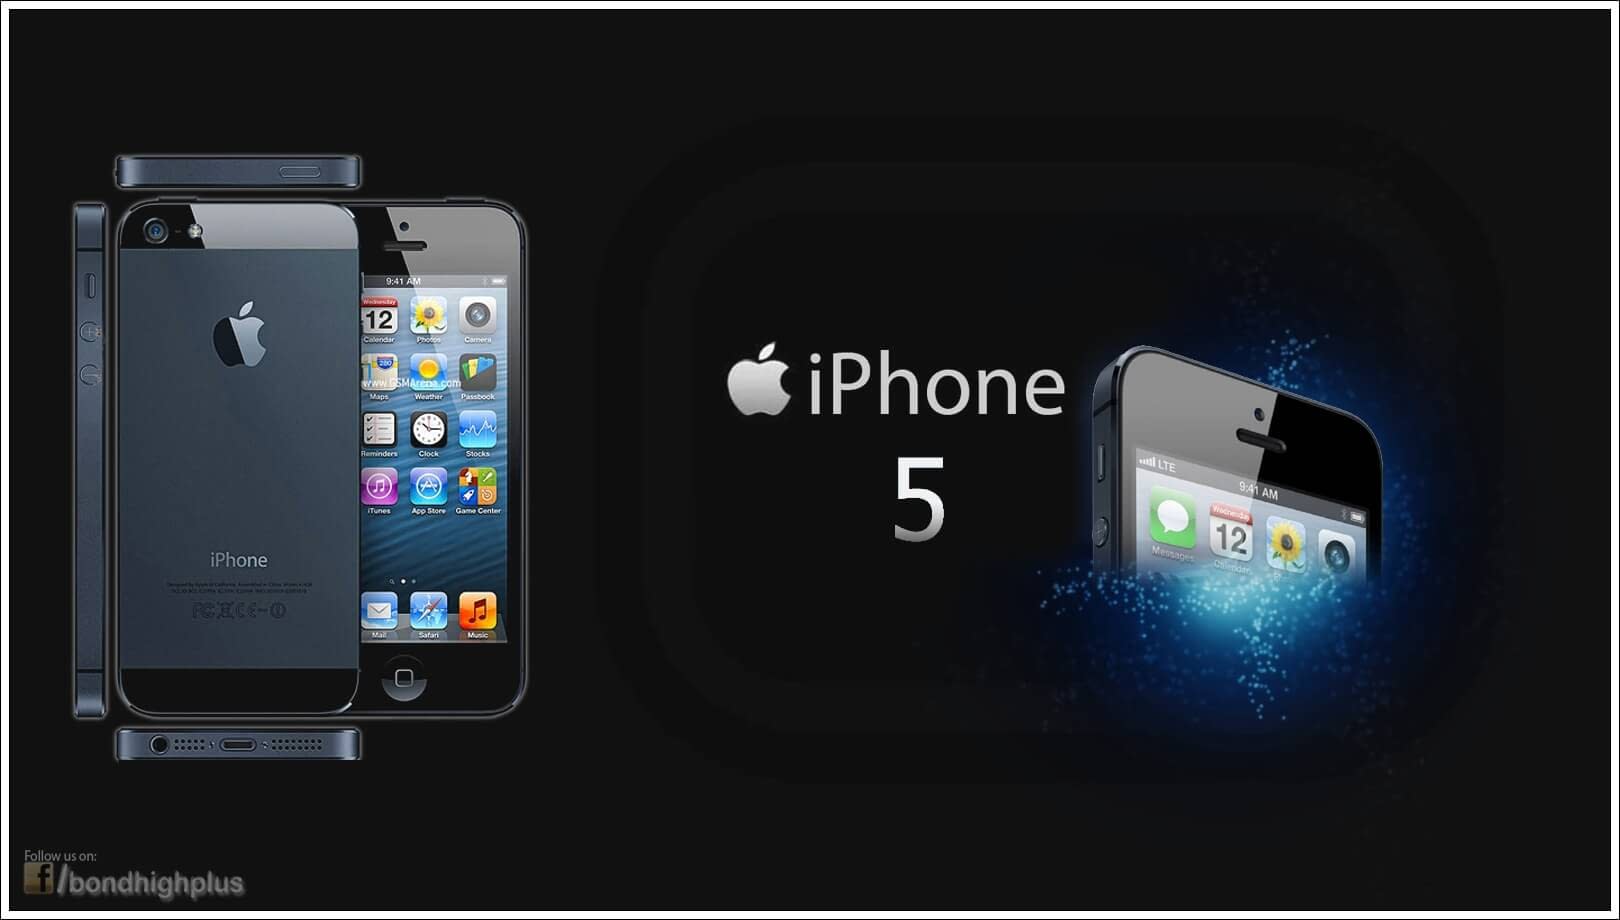 Differences between Apple iPhone 5 and 4S